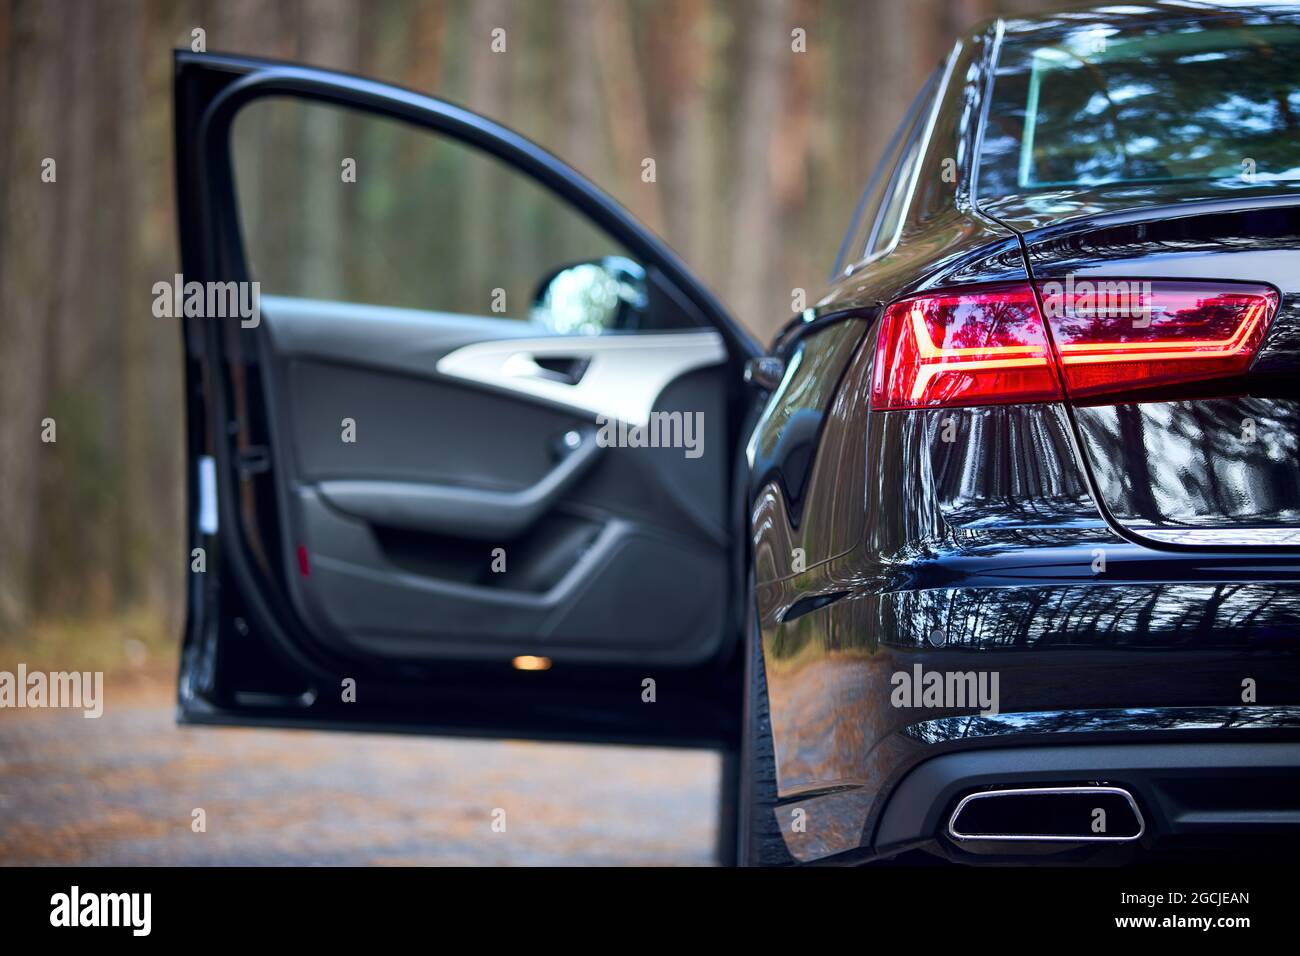 GRODNO, BELARUS - DECEMBER 2019: Audi A6 4G, C7 2016 Left back rearlight of  black metallic car shot closeup with opened door out of focus on forest  Stock Photo - Alamy